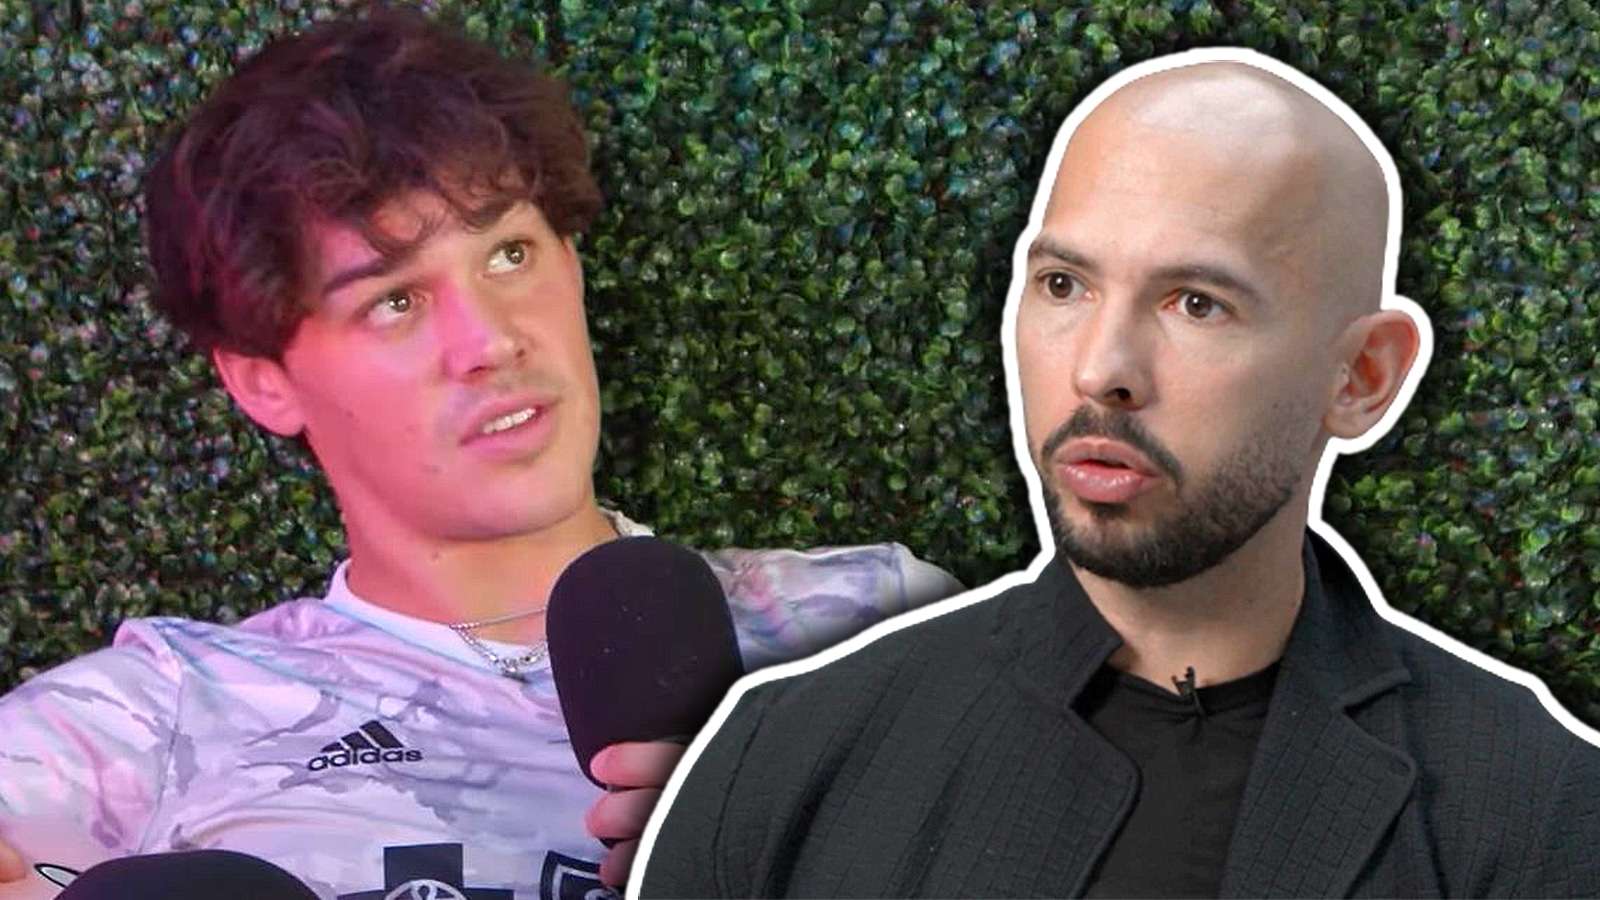 Noah beck under fire for andrew tate comments